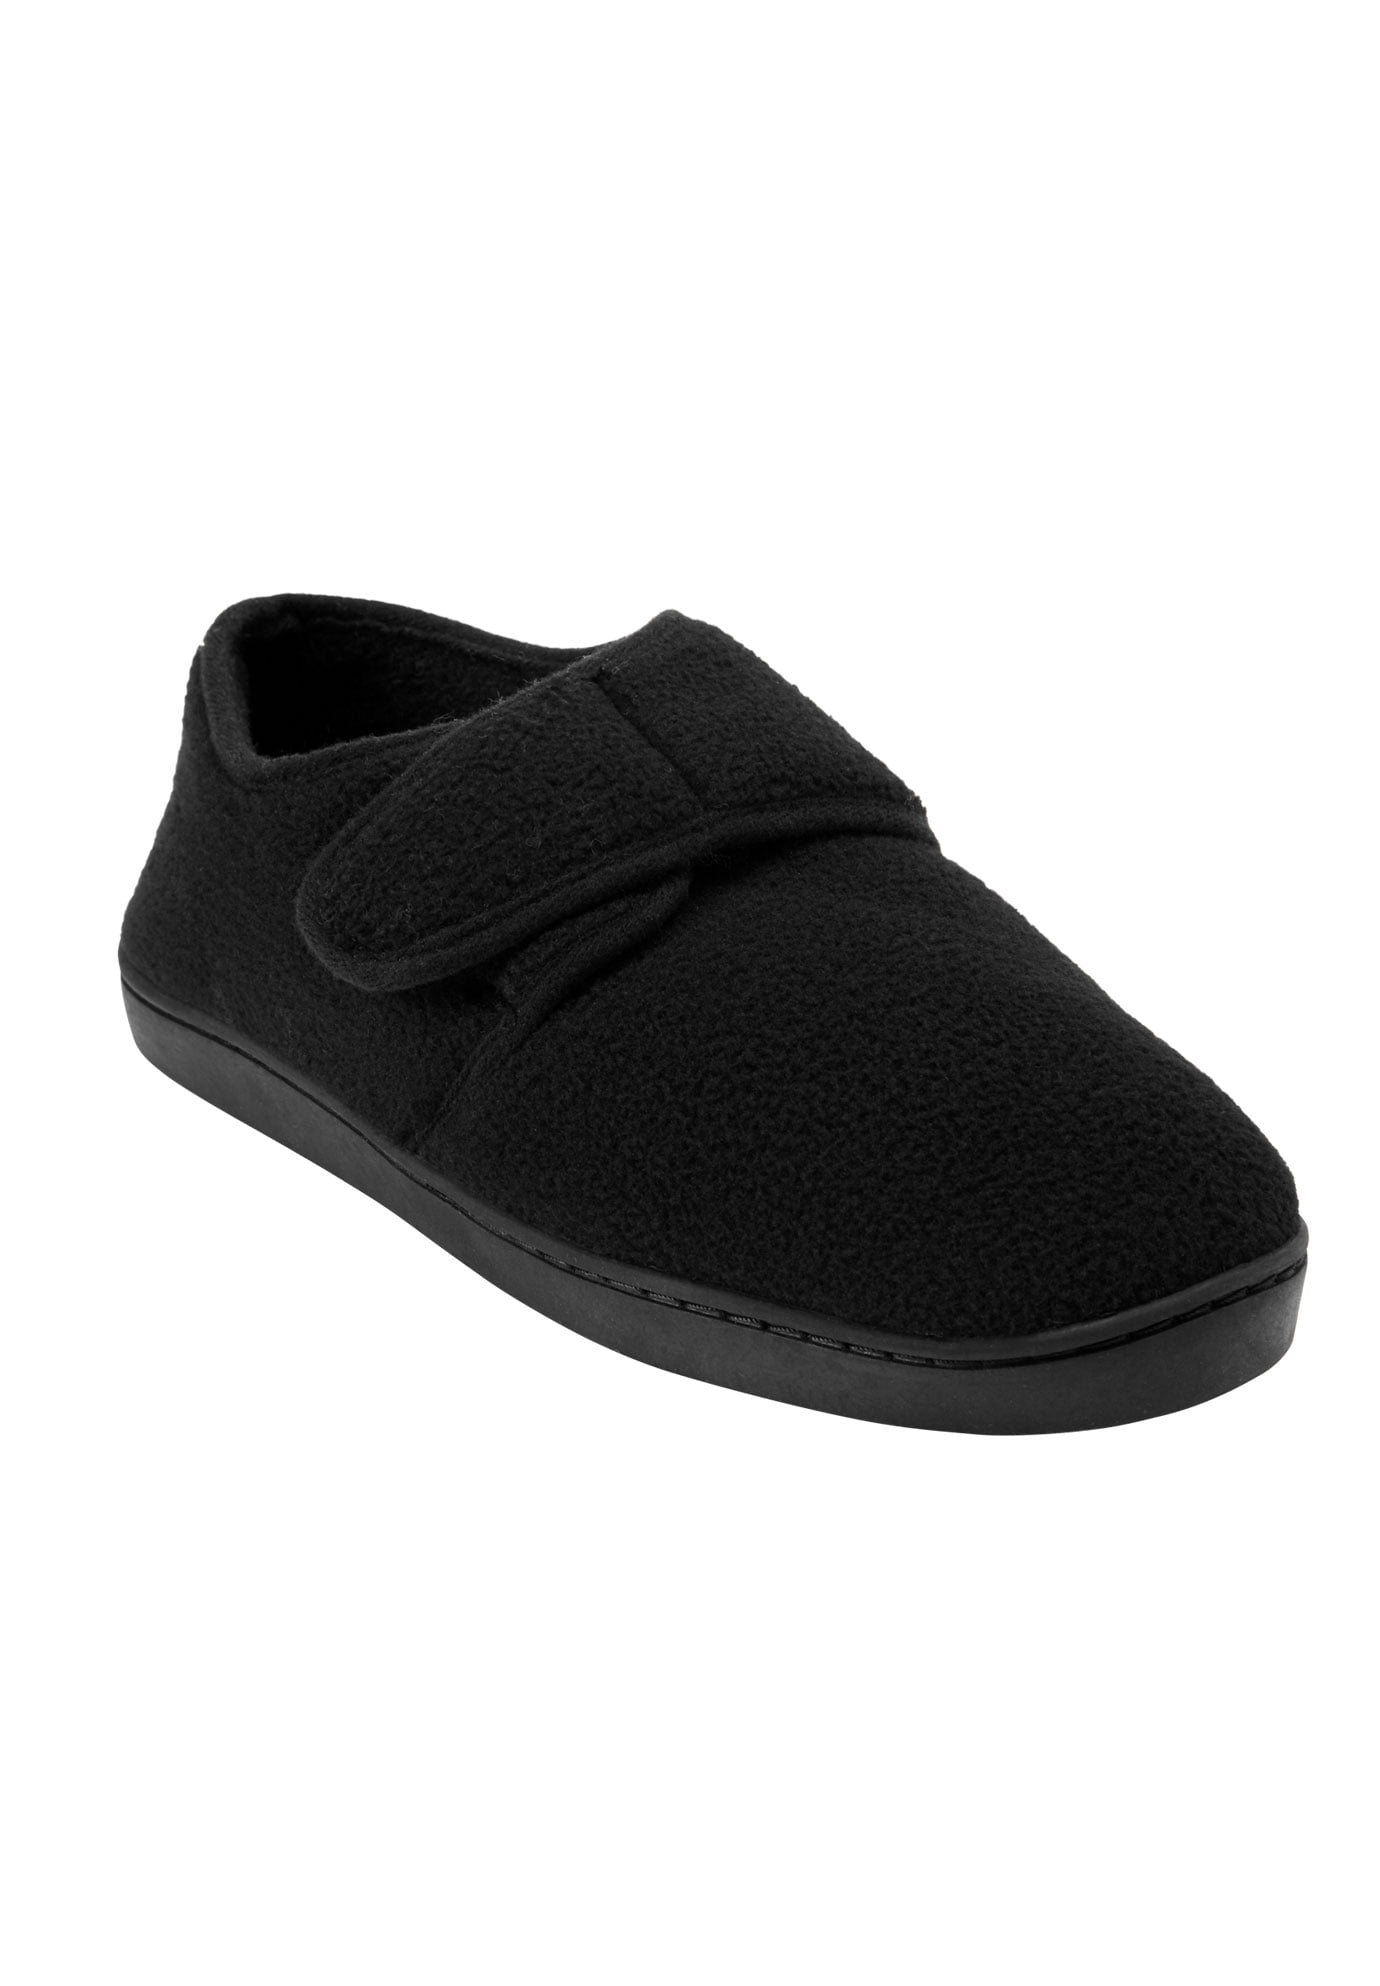 mens slippers with velcro strap